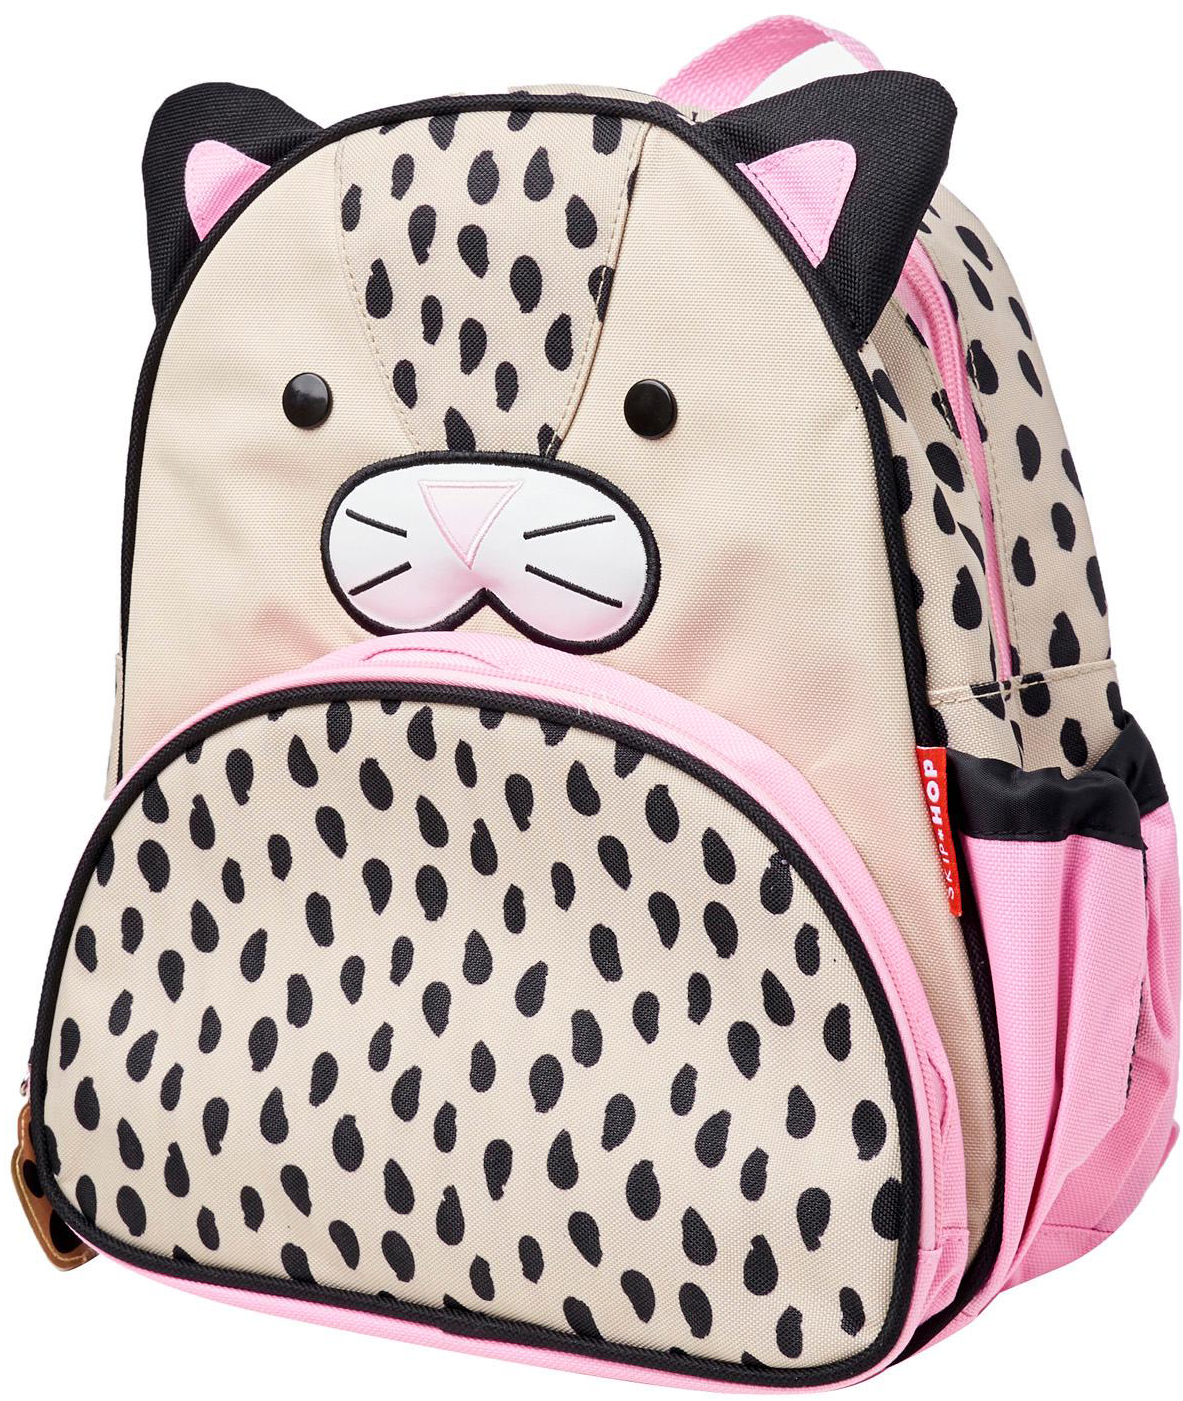 Butterfly Zoo Big Kid Backpack - Butterfly | skiphop.com